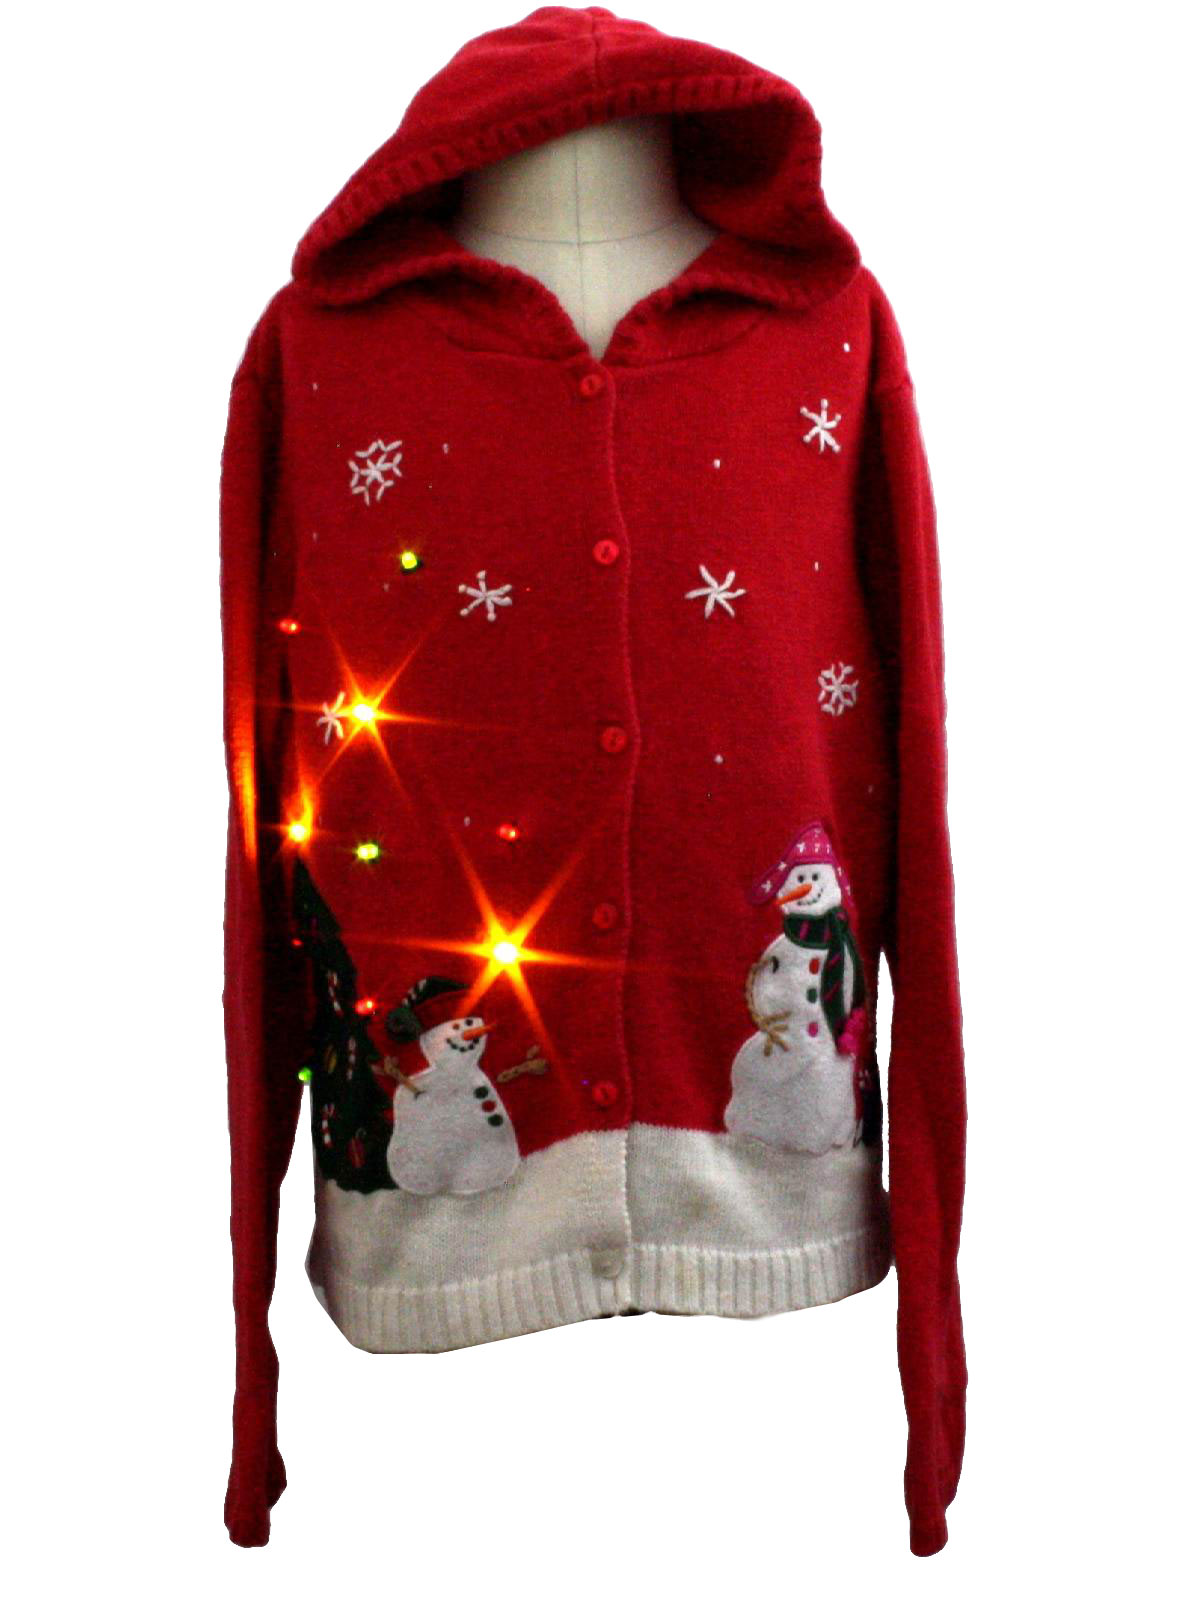 /Childs Lightup Hoodie Ugly Christmas Sweater: -No Label- Unisex/Childs ...